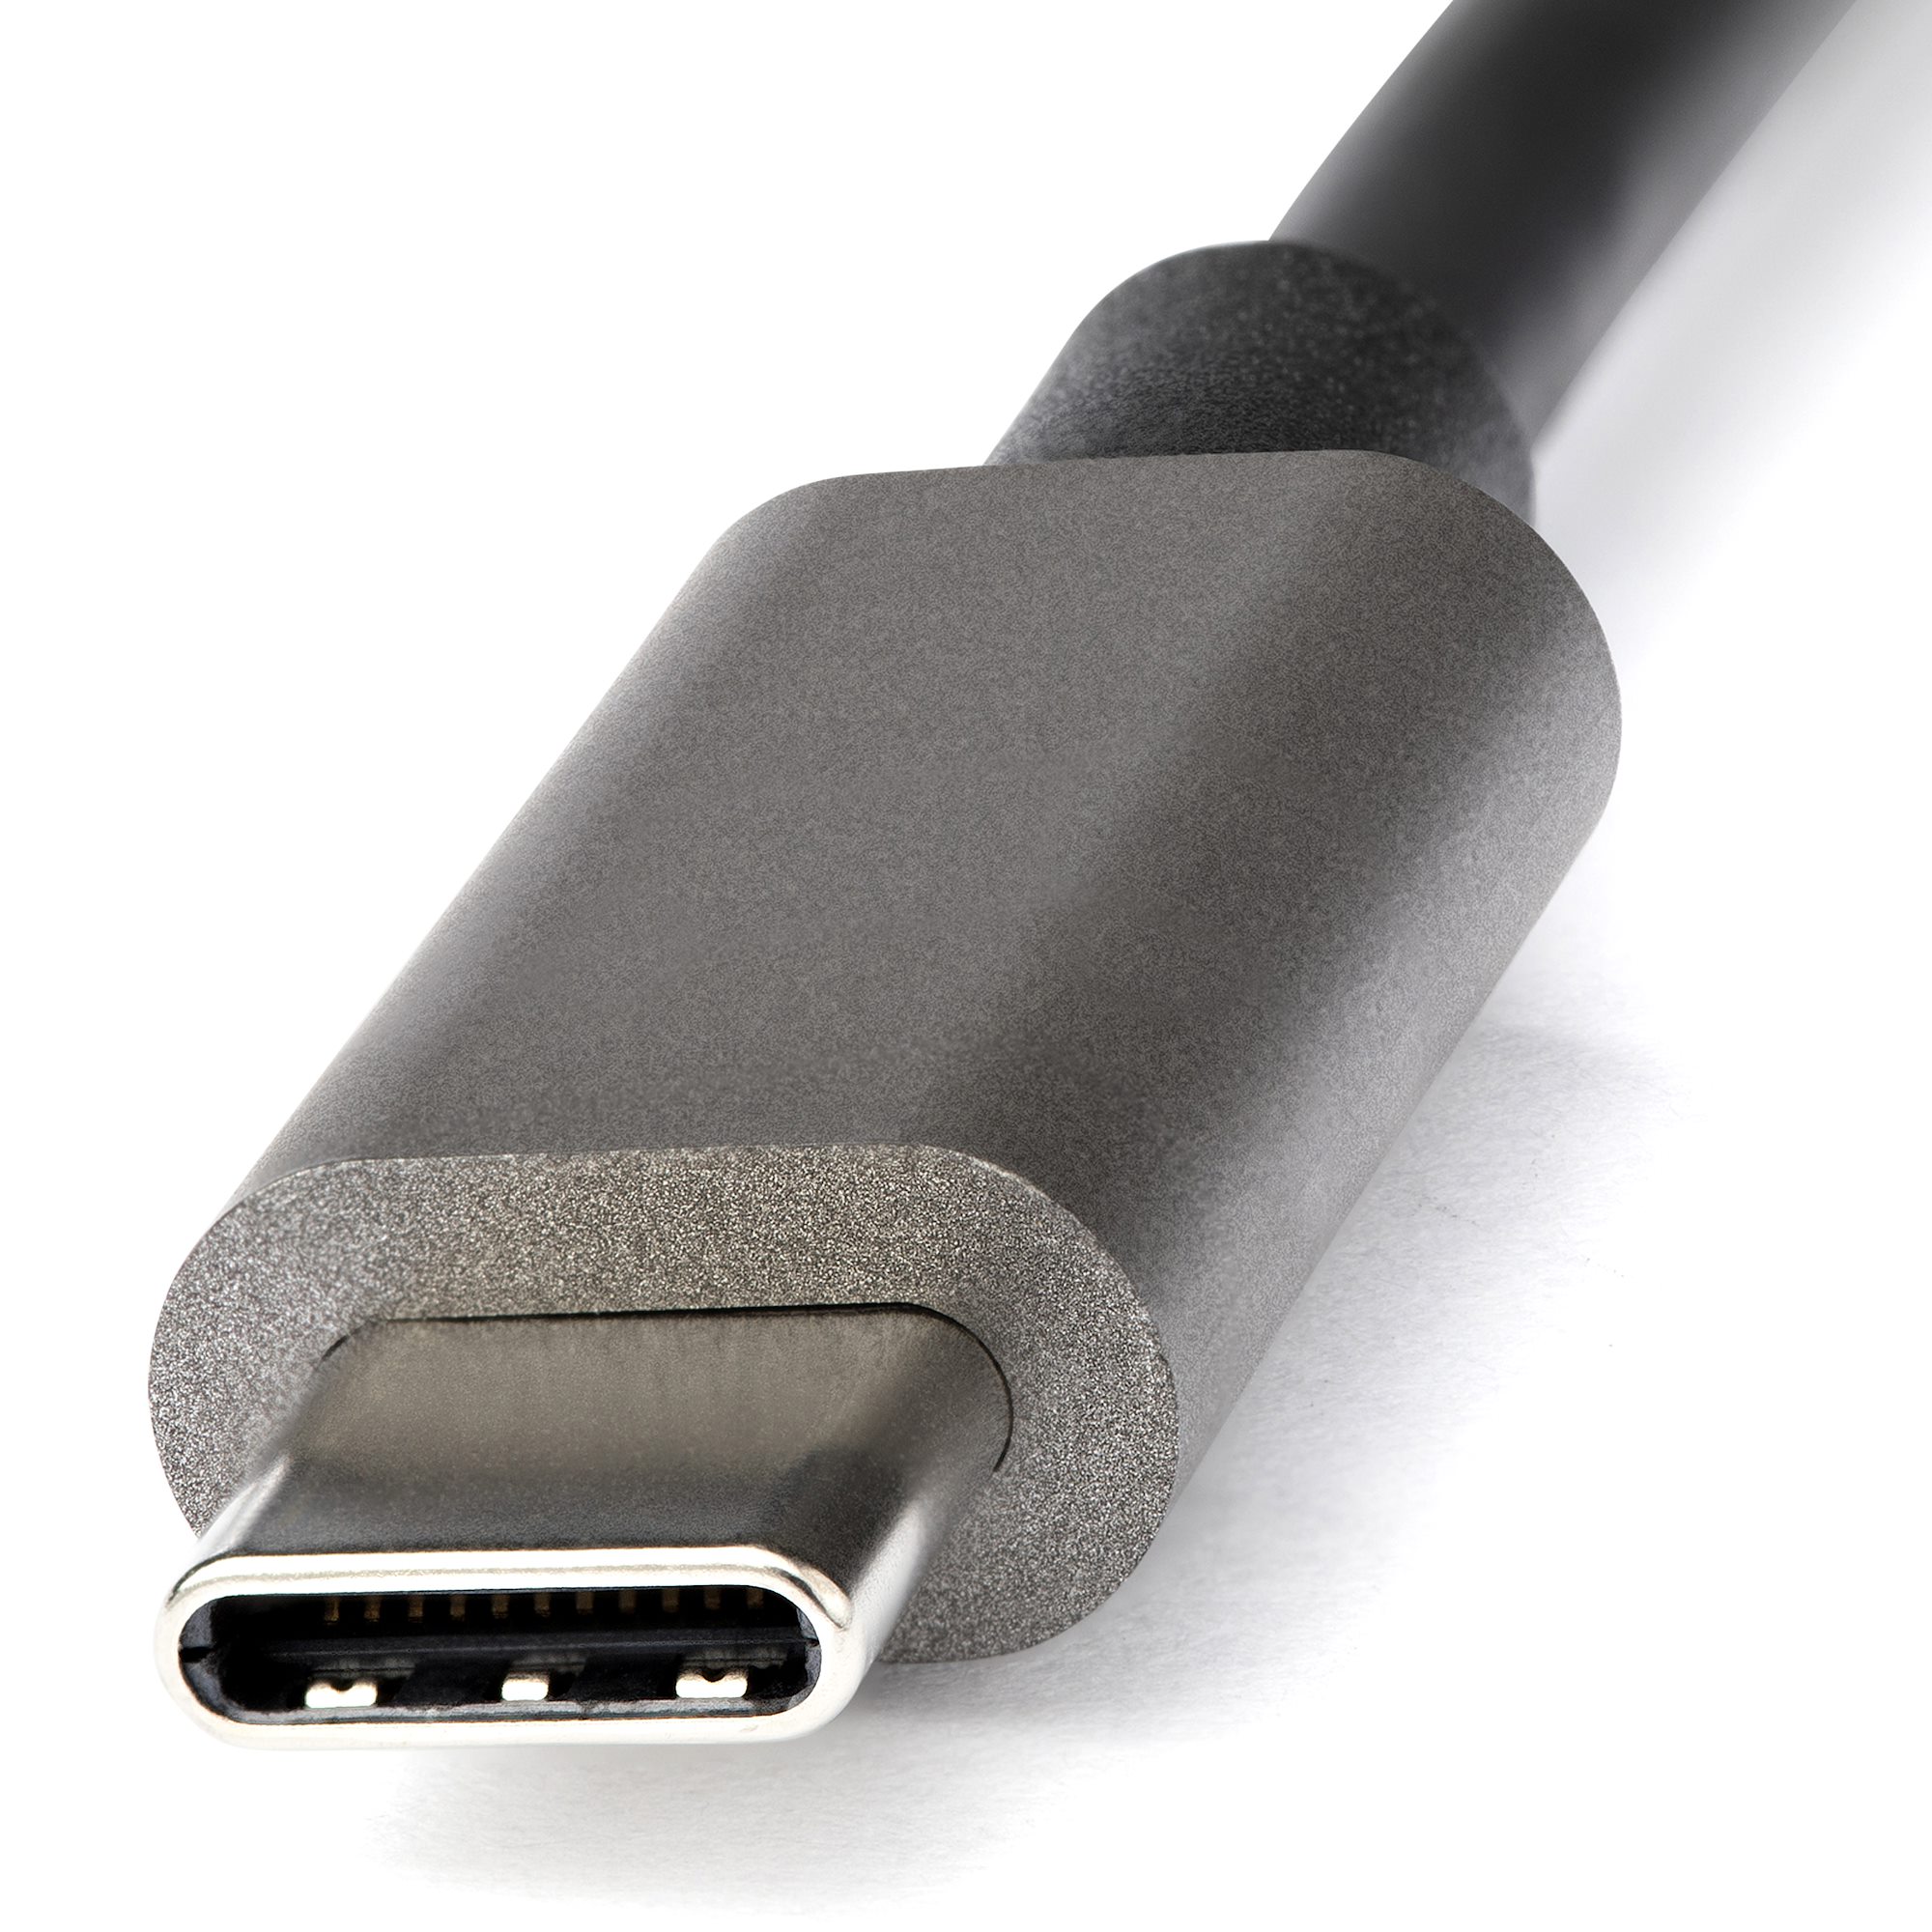 USB-C to HDMI 2.0 Cable